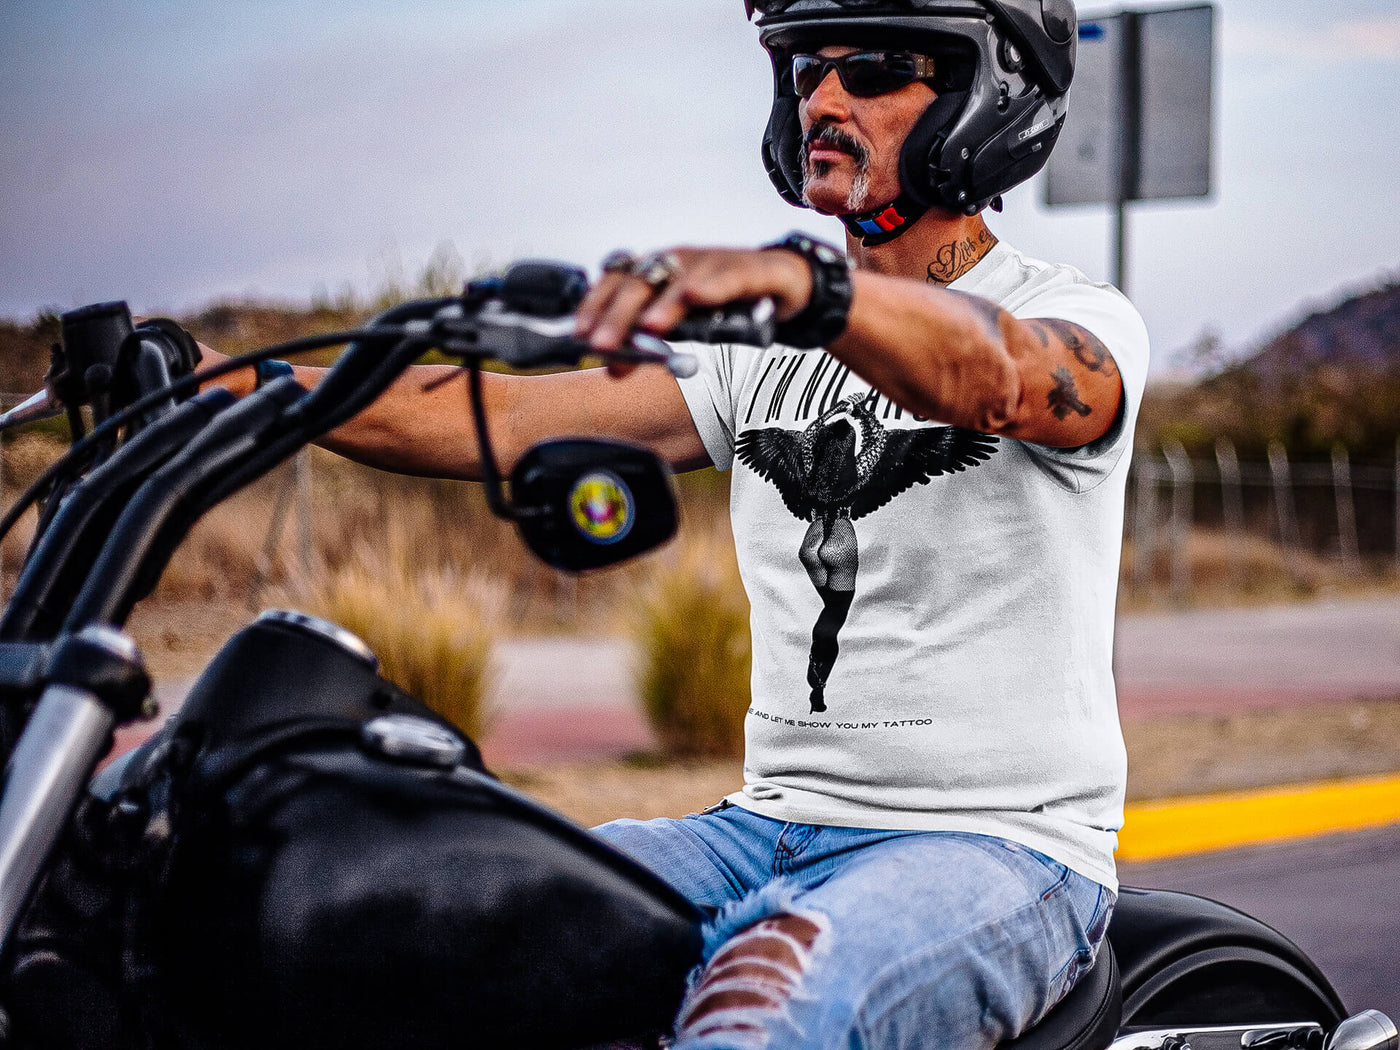 Biker riding a motorcycle, clad in 'I'm No Angel Cher' T-shirt by Gllamazon, exuding a sense of freedom and adventure.